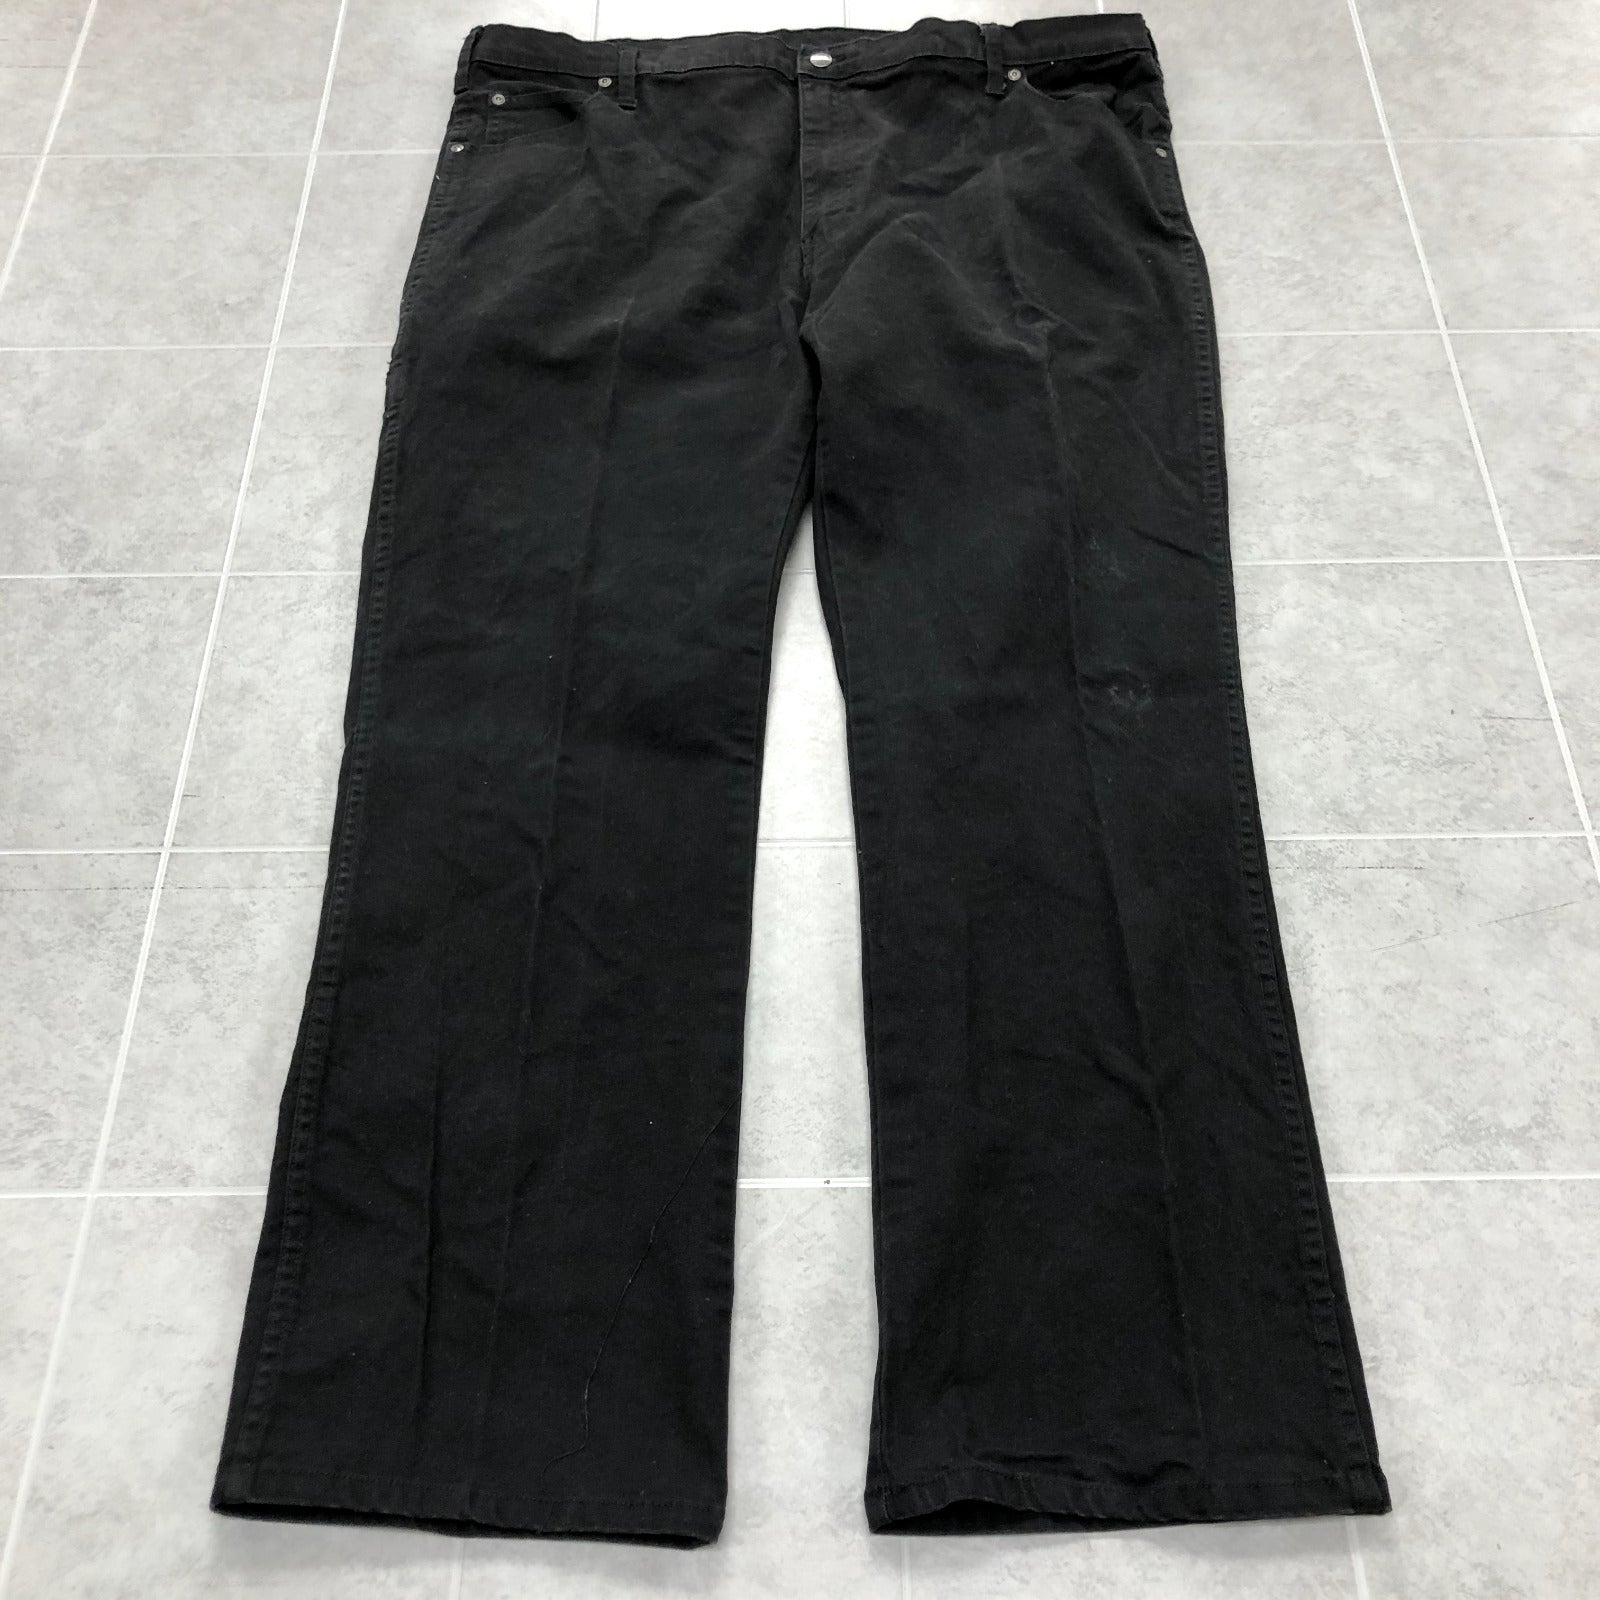 Dickies Black High-Rise Flat Front Straight Legged Canvas Jeans Adult Size 42